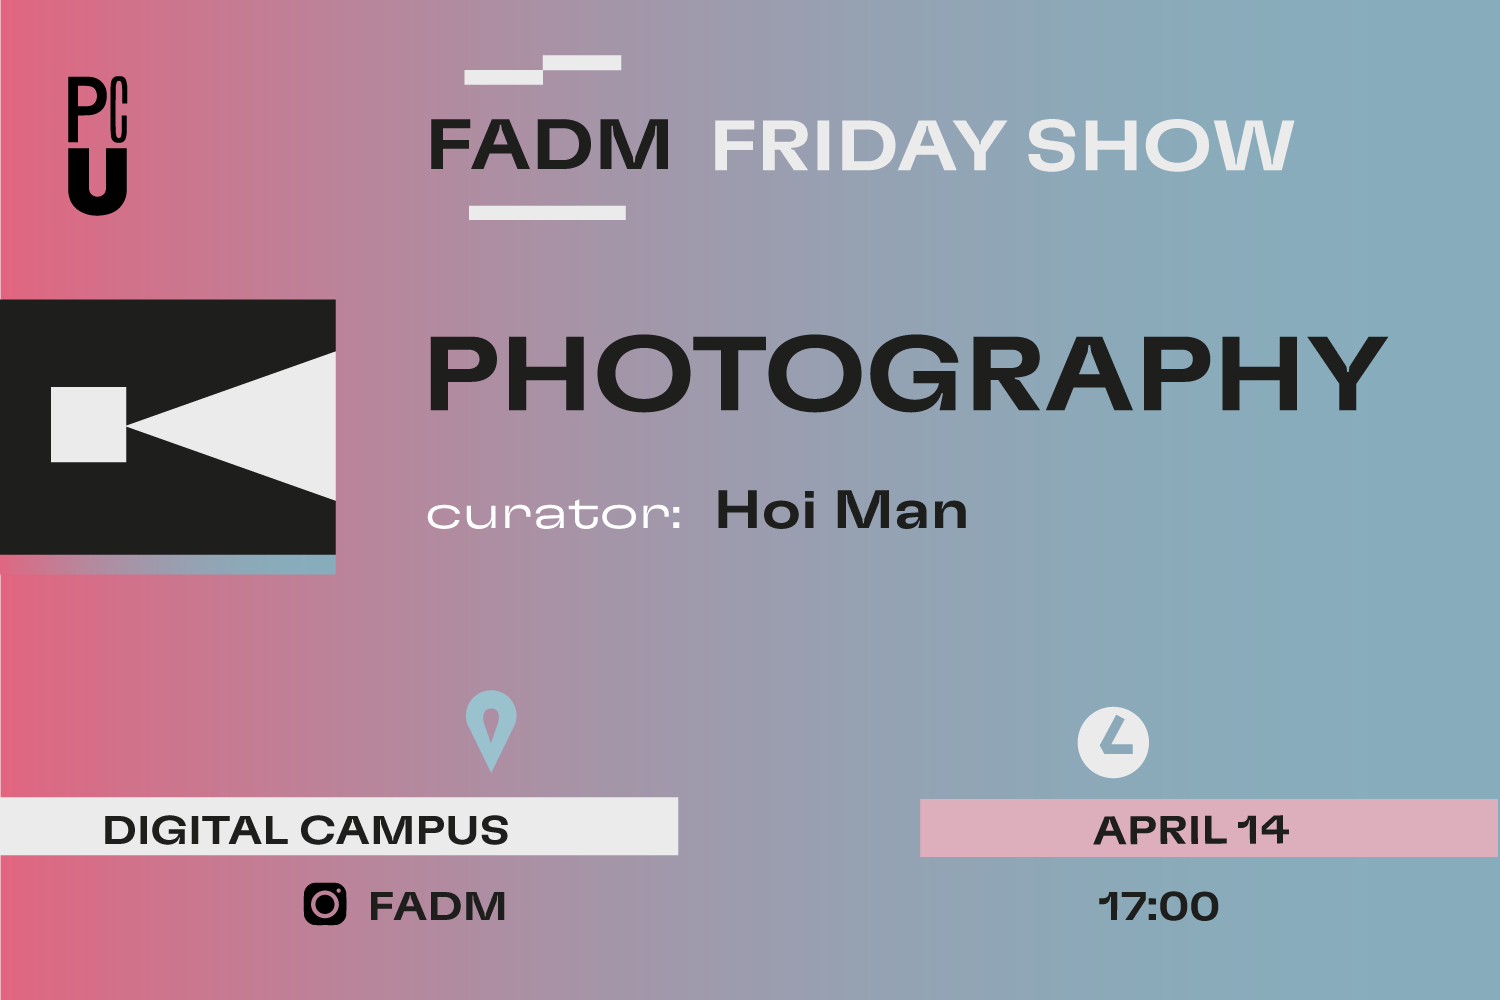 PCU Friday Show Photography